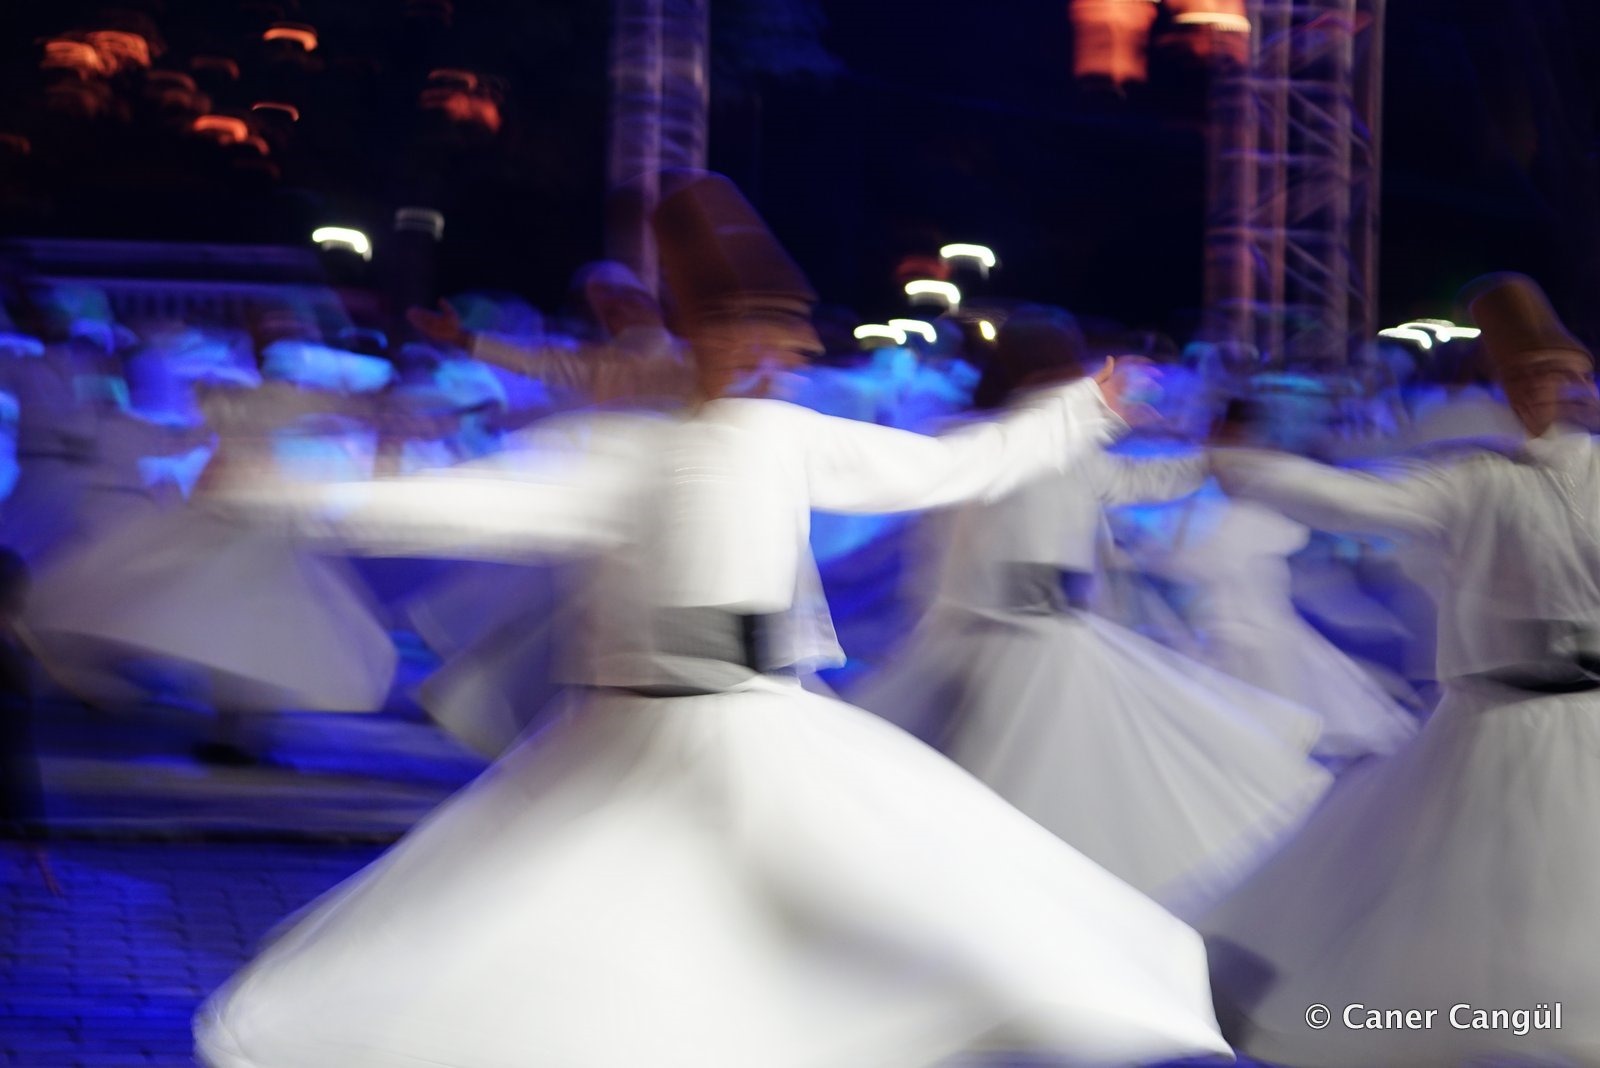 750 Whirling Dervishes Perform